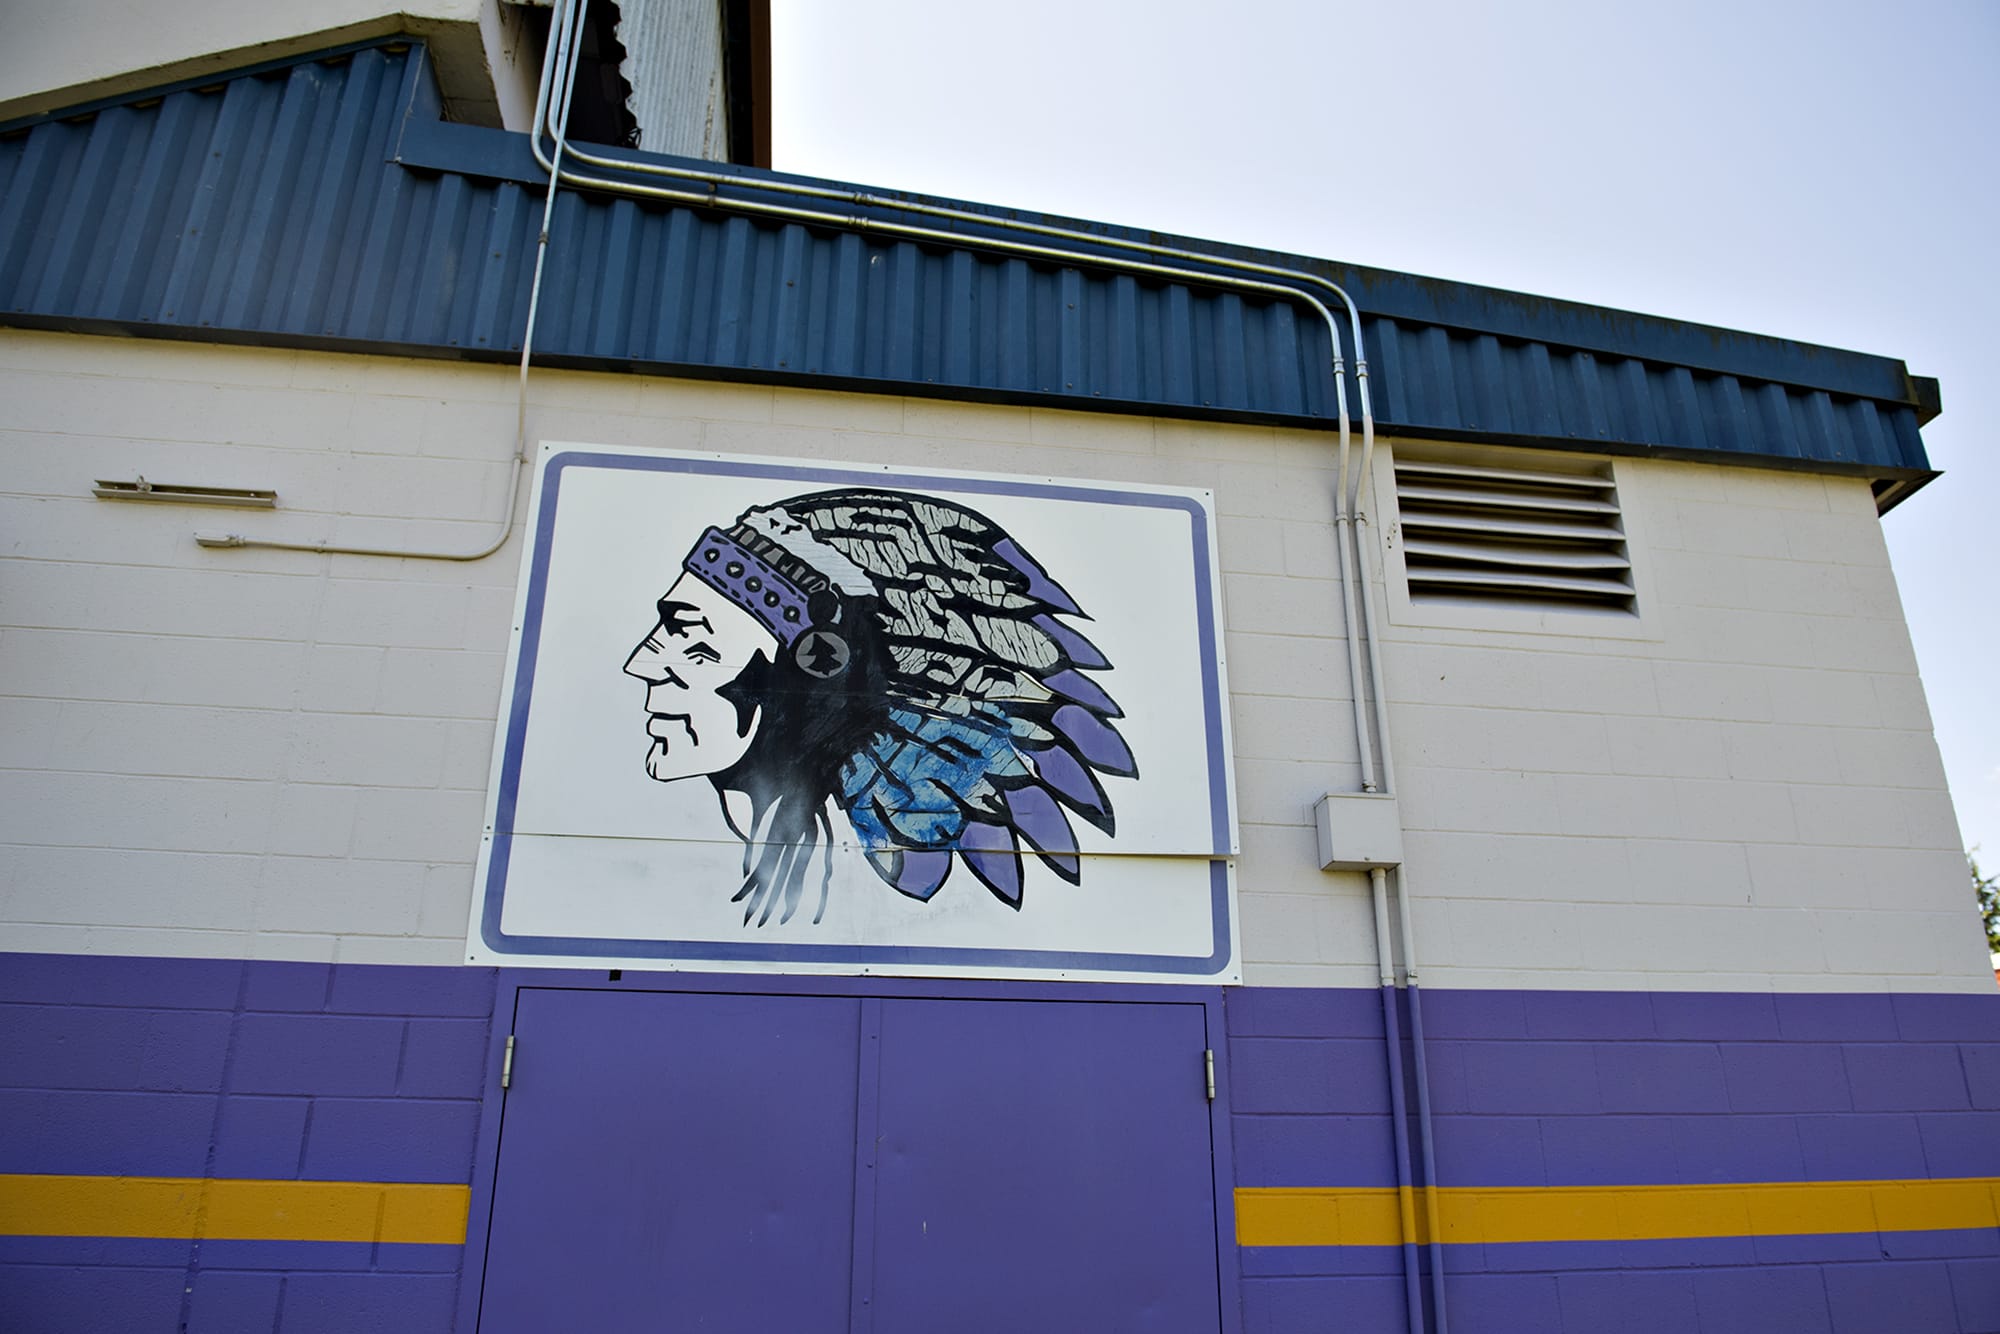 The Vancouver Public Schools Board has decided to retire the Chieftain mascot at Columbia River High school.